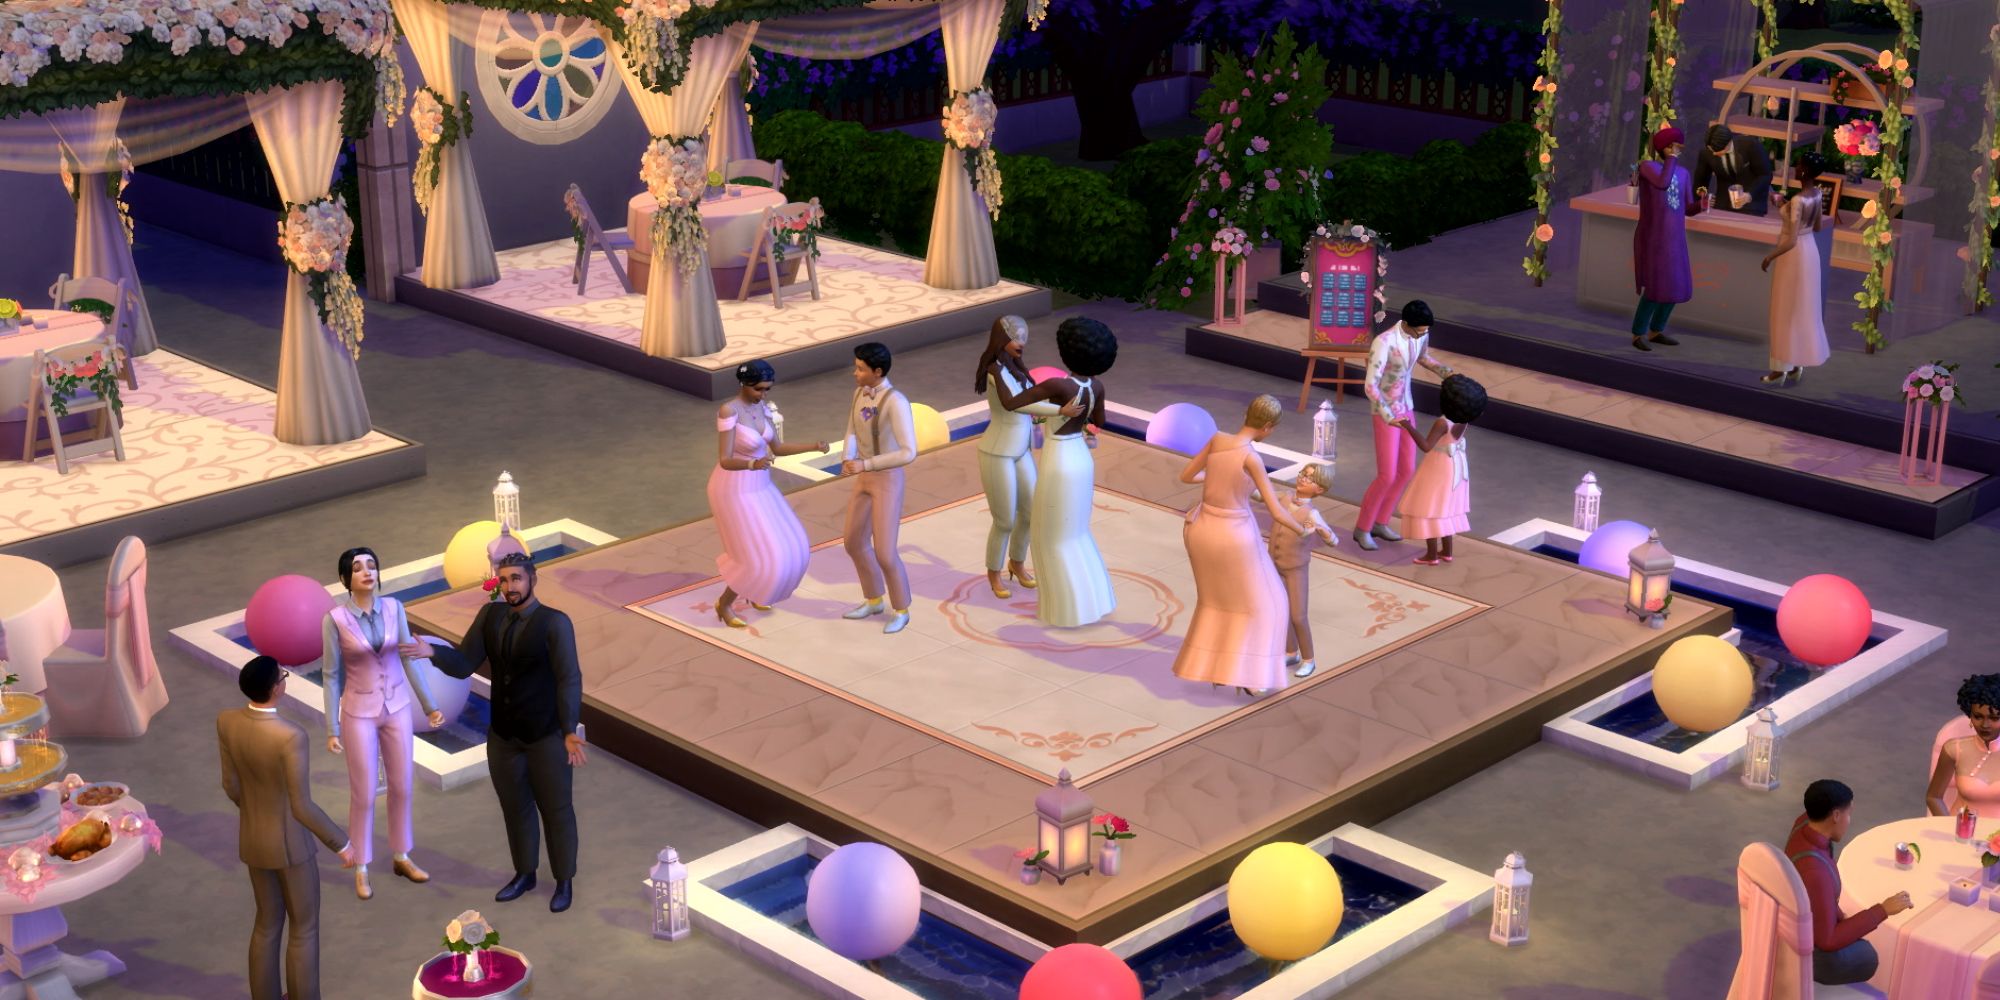 How To Plan A Wedding ceremony In The SIms 4